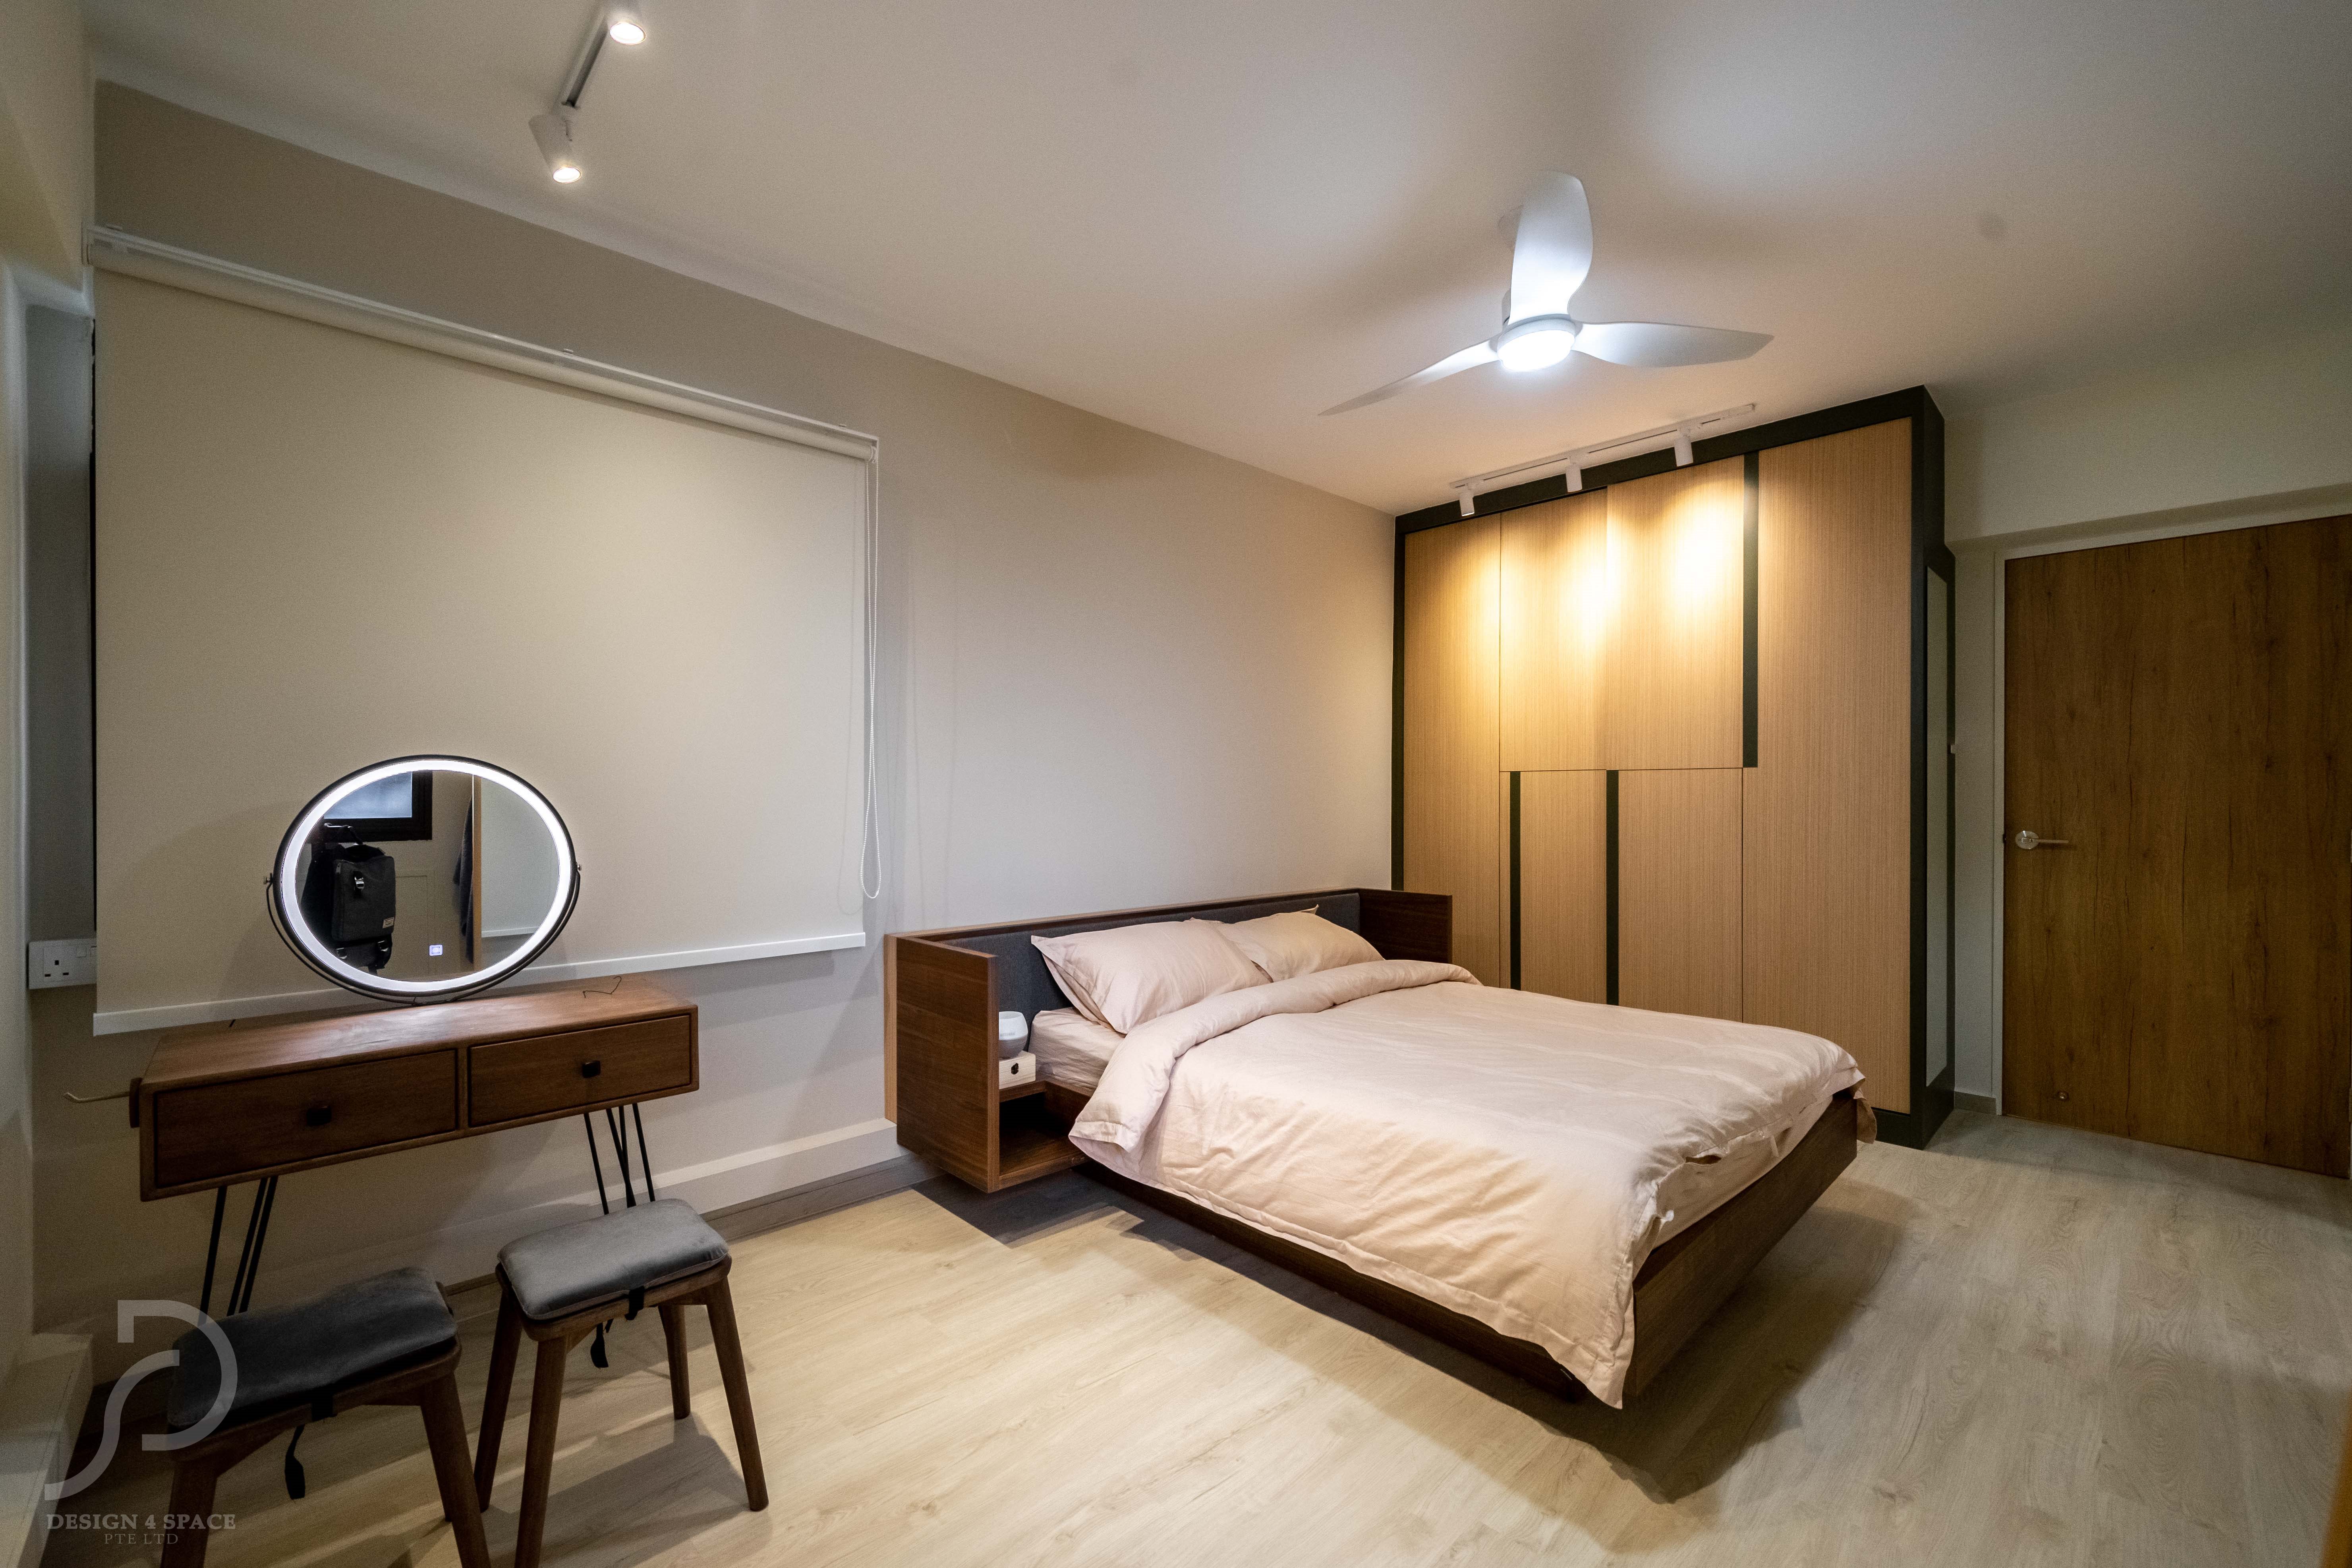 Contemporary, Modern, Others Design - Bedroom - HDB 5 Room - Design by Design 4 Space Pte Ltd